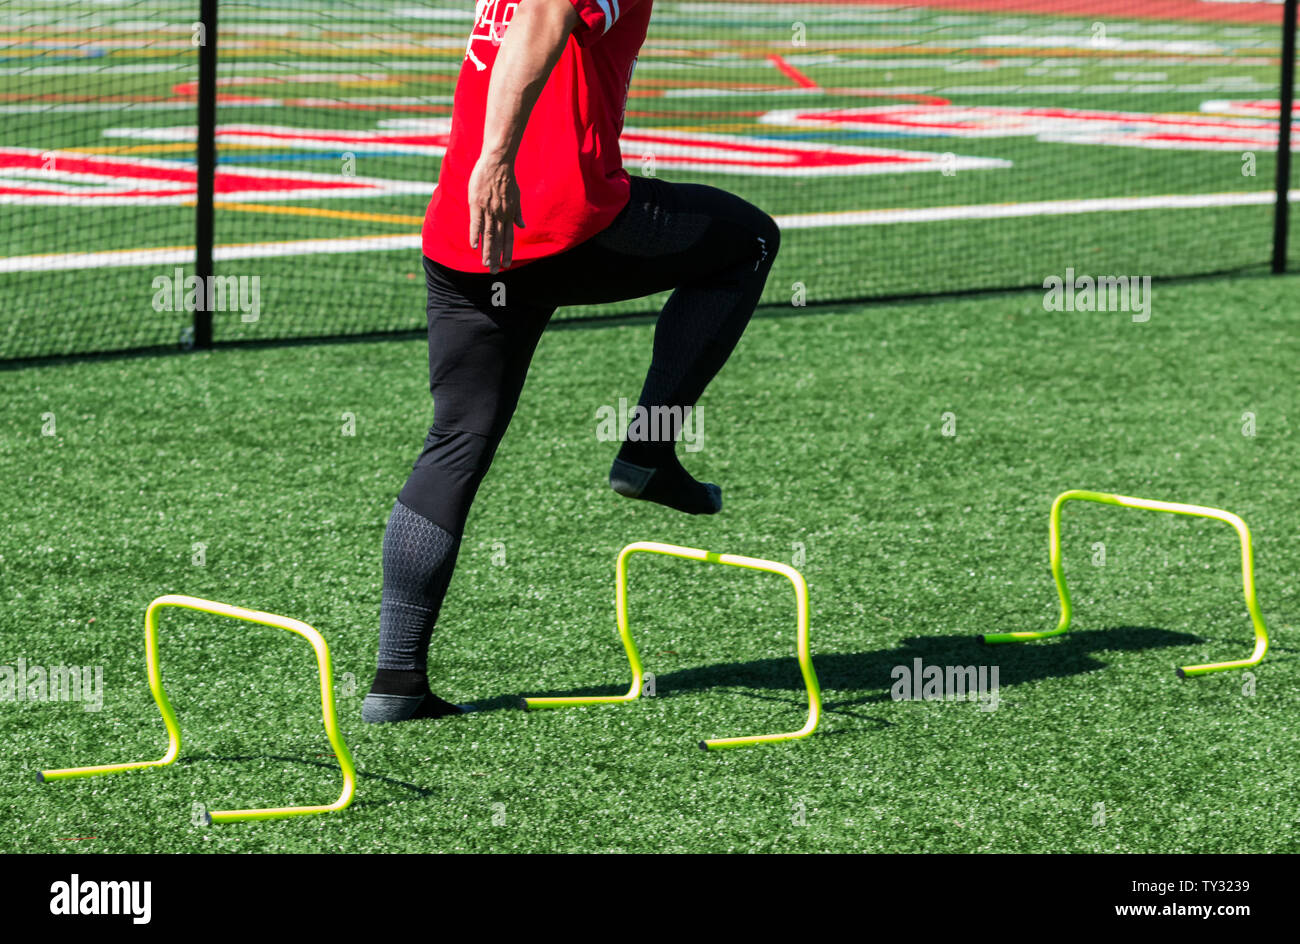 A high school track and field athlete is stepping over yellow mini hurdles with no shoes on to help develop foot strength. Stock Photo